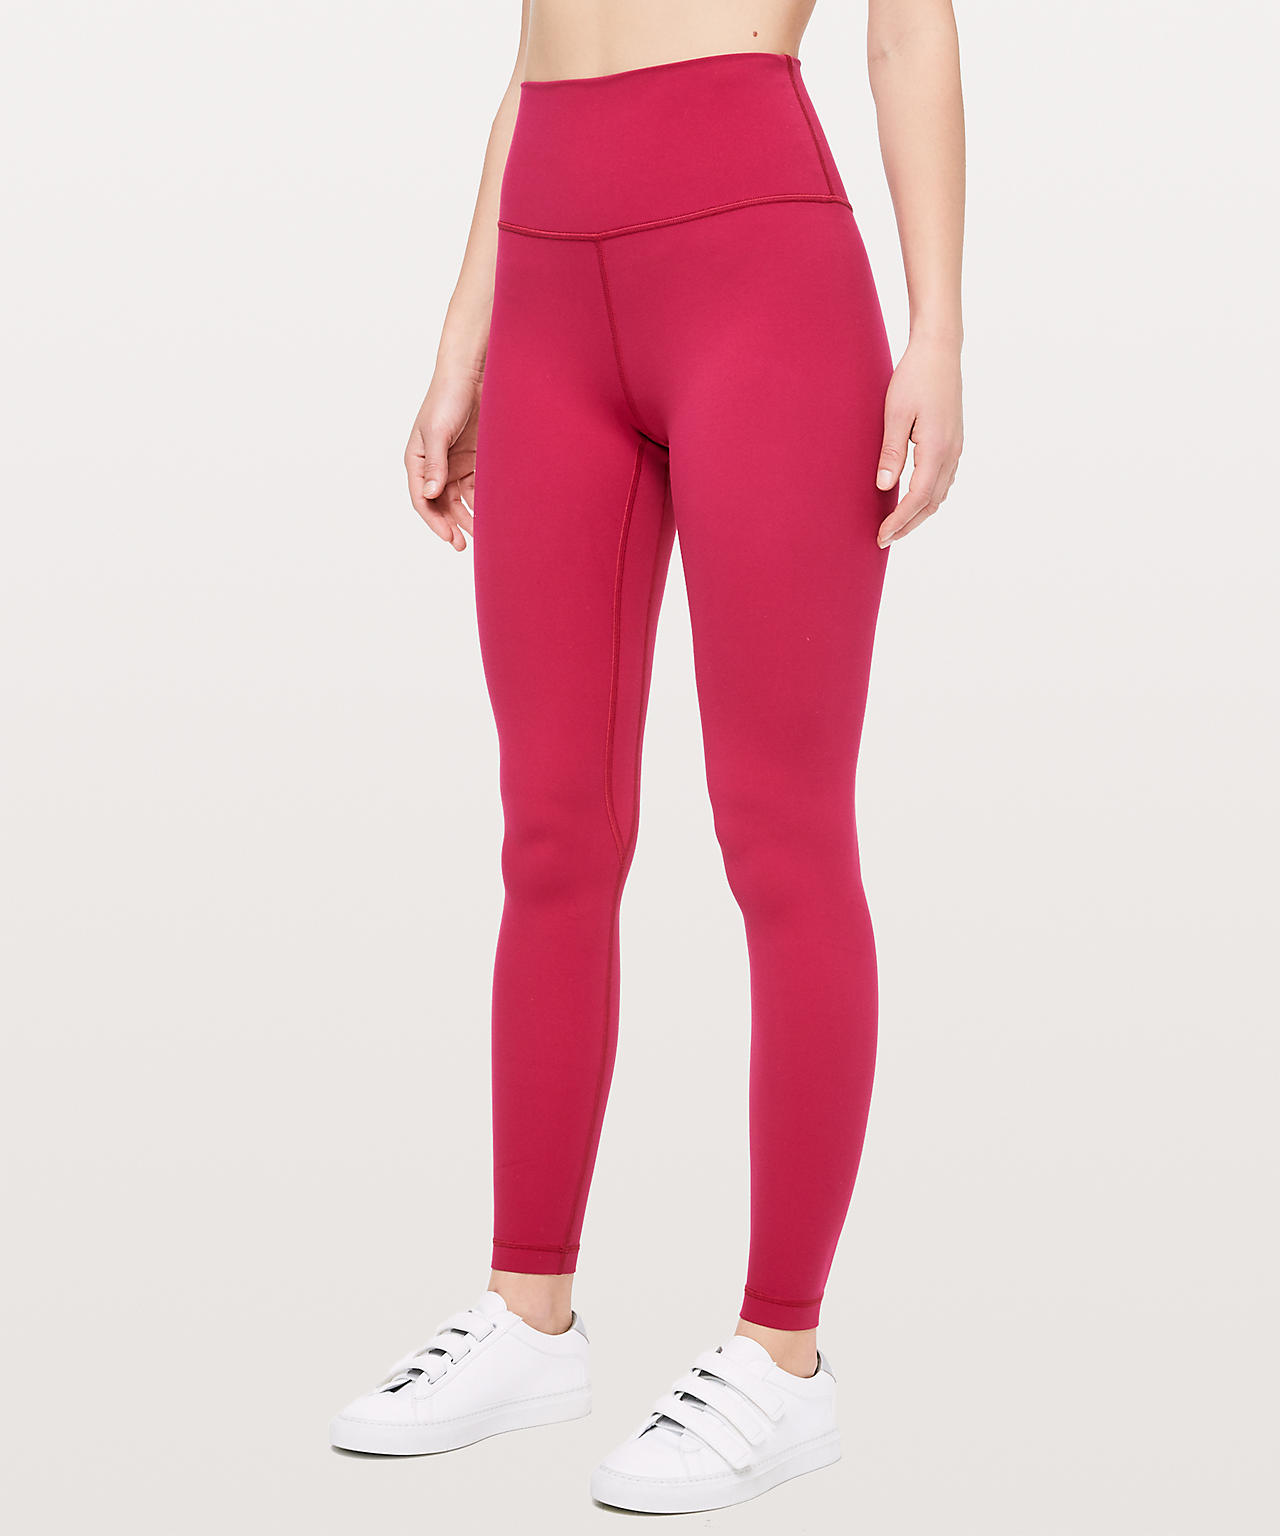 Are Lululemon Align Leggings Sweat Proofreading  International Society of  Precision Agriculture